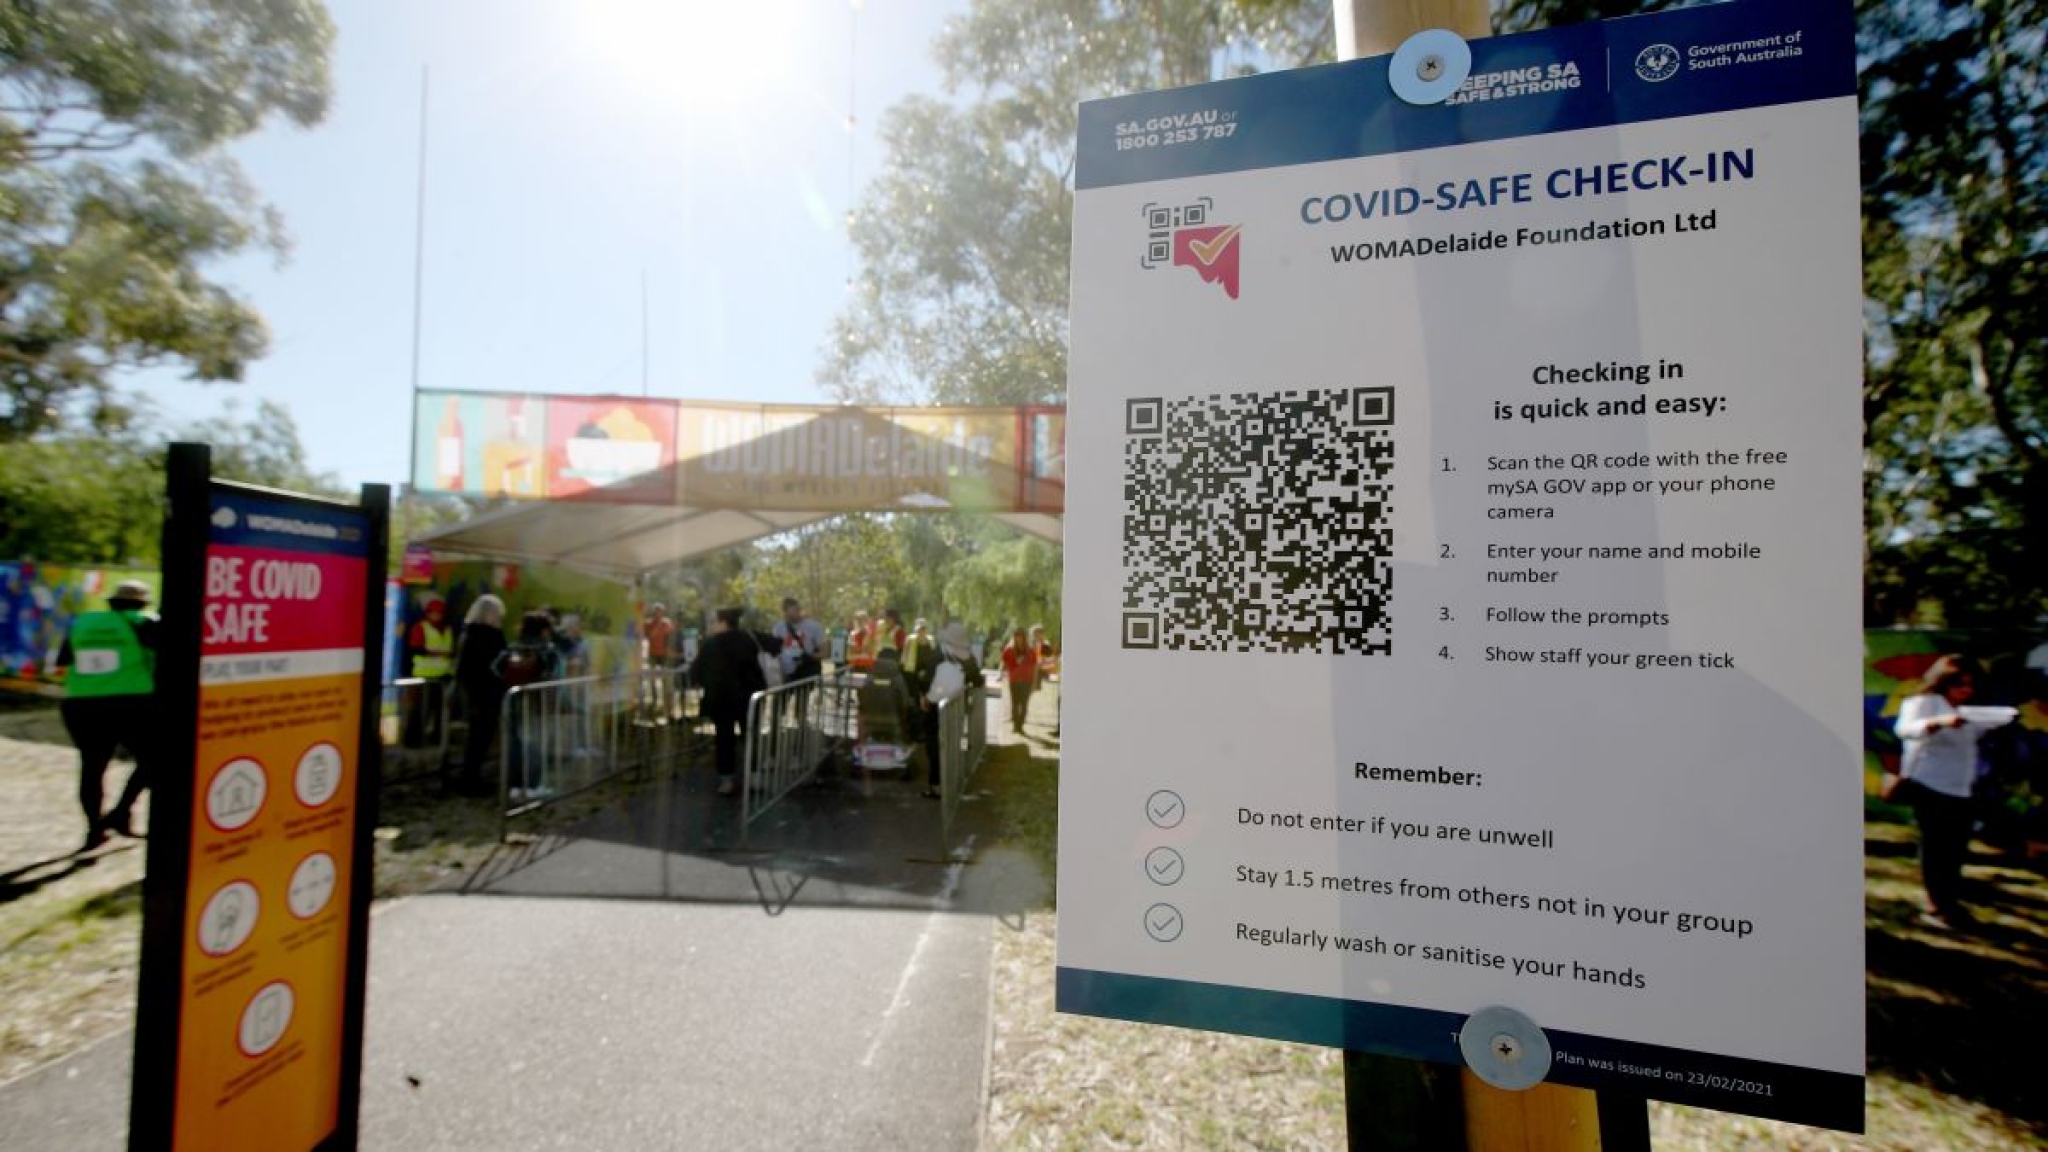 Man Banned From Carrying ‘Loose QR Codes’ After Altering Covid Check-In Signs